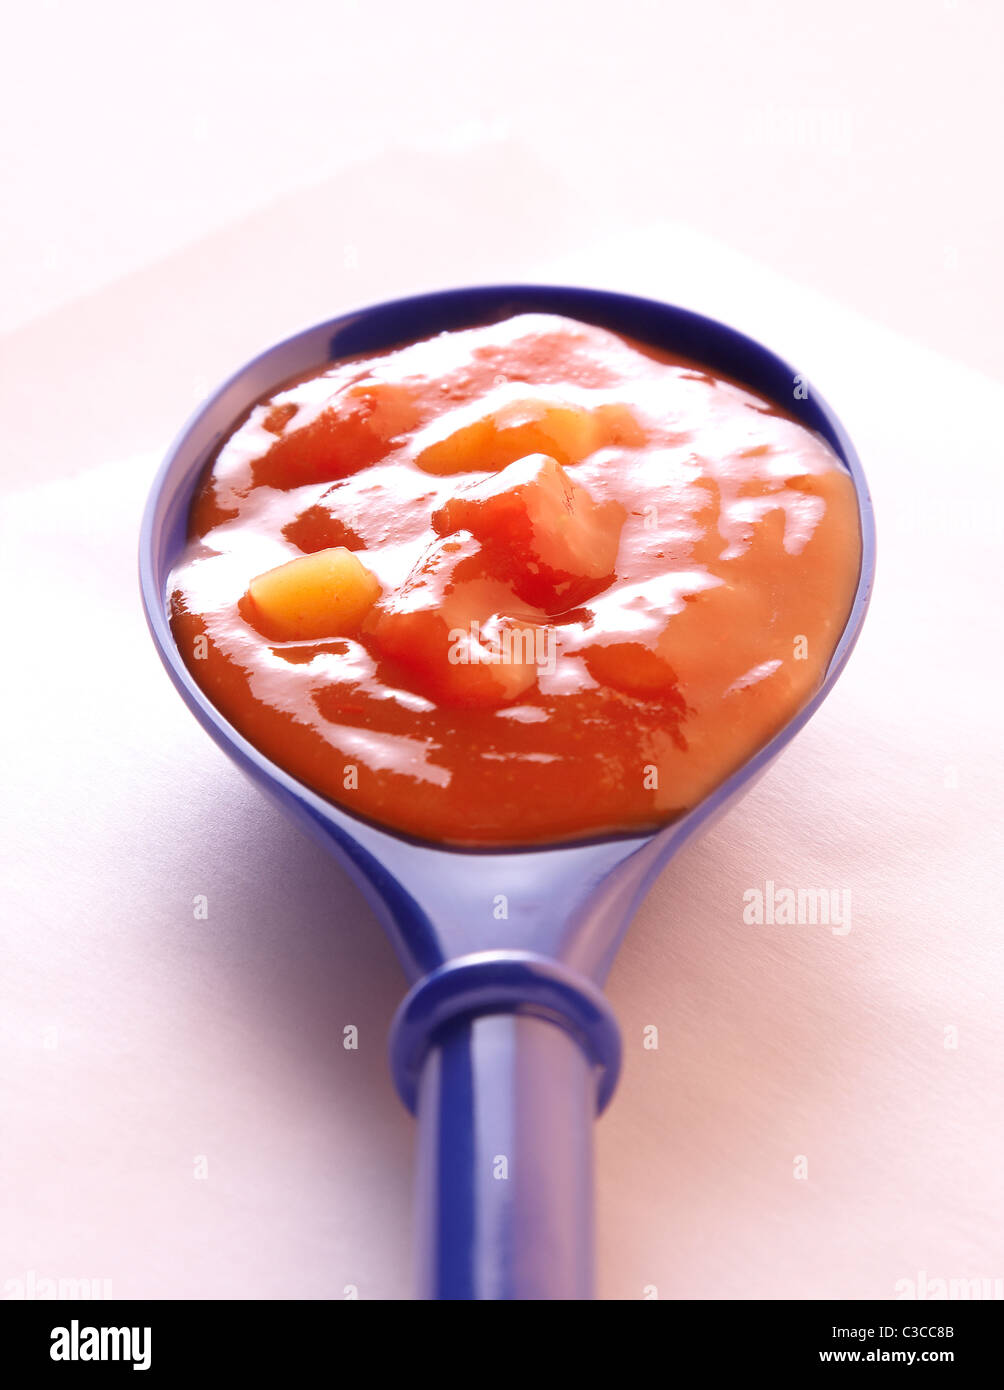 Salsa in a spoon Stock Photo